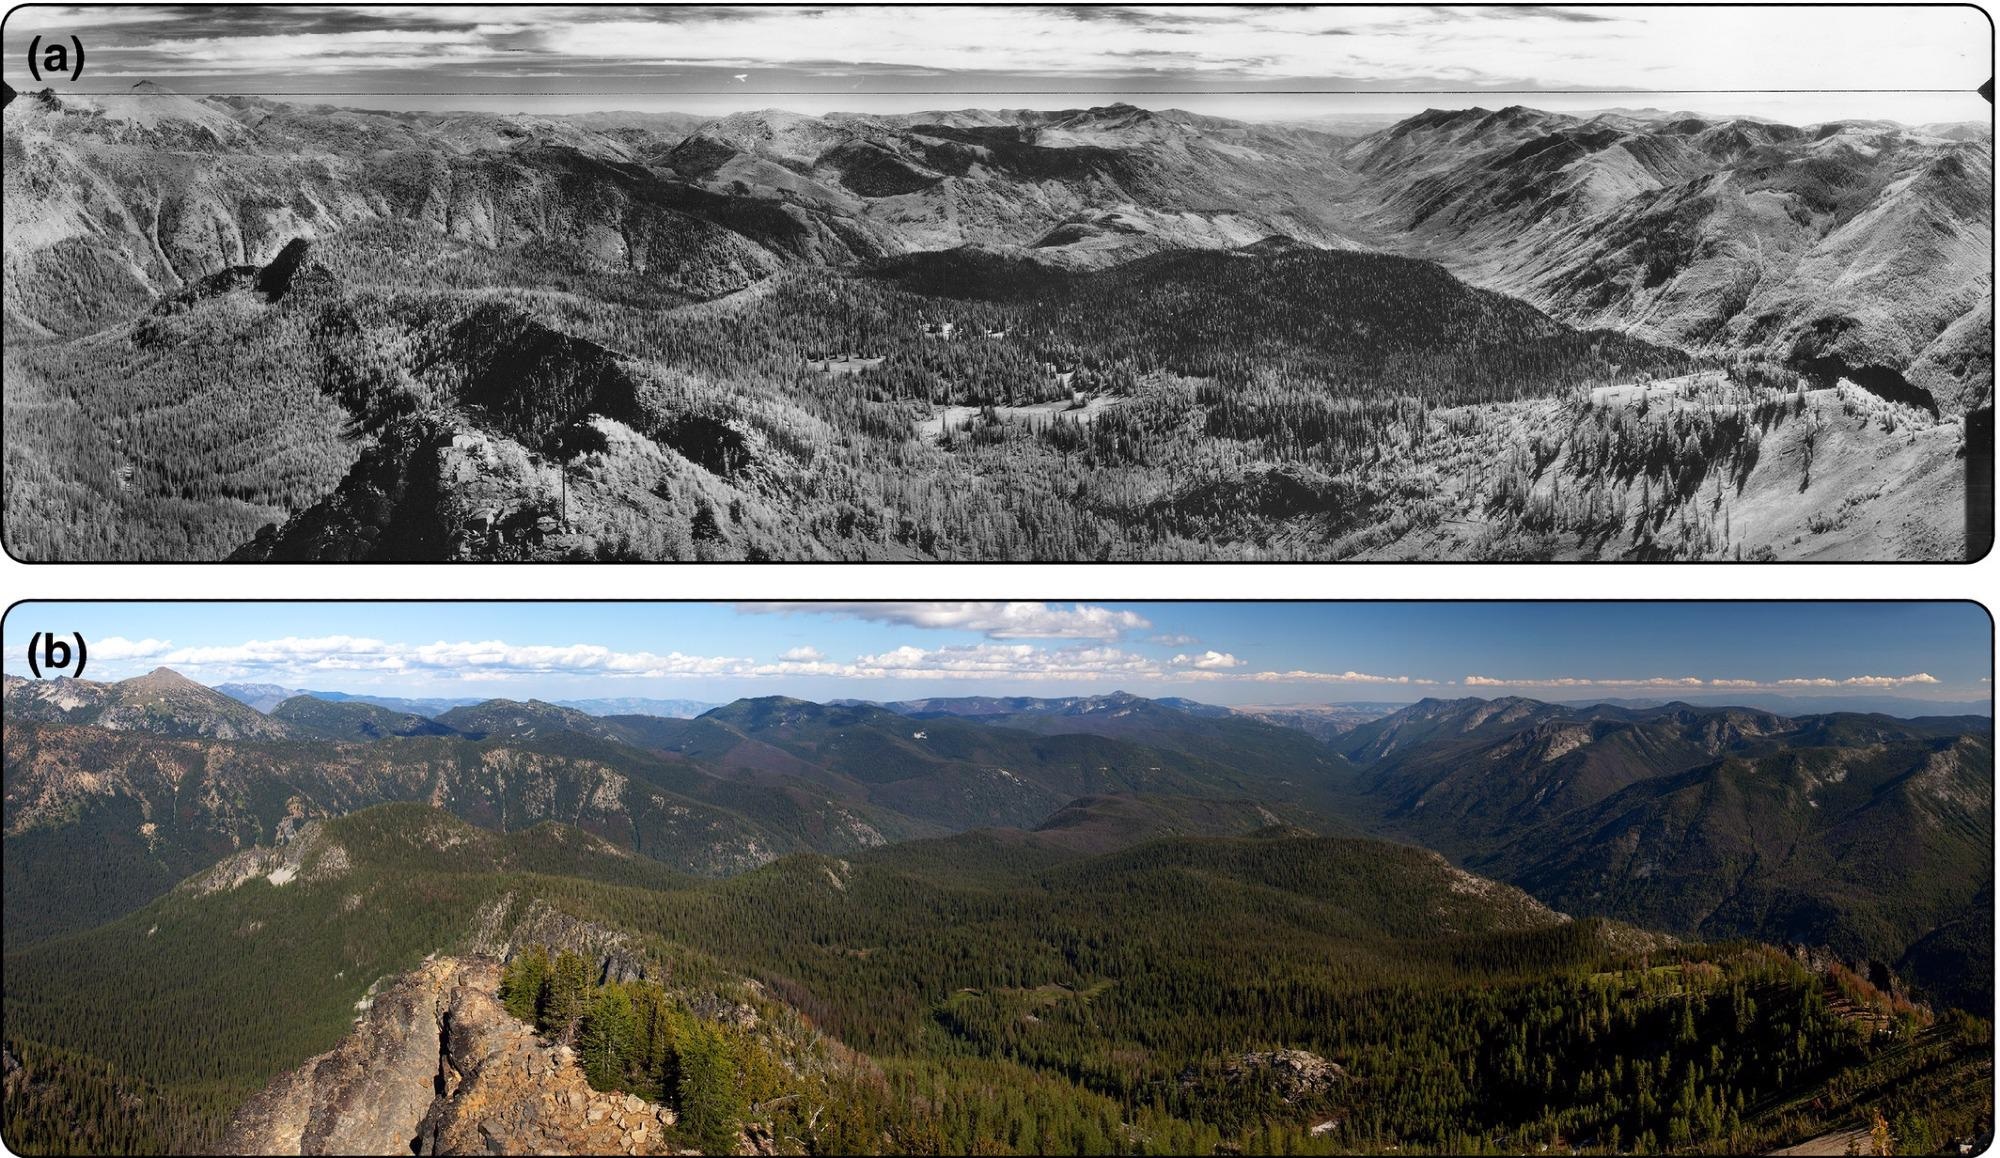 A densely treed landscape emerges. Panoramic photographs – taken from Duncan Hill, Washington, looking southeast along the Entiat River drainage to the Columbia River – show the majority of the 238,000-ha Entiat drainage in (a) 1934 and (b) 2012. Fire exclusion and selection cutting broadly homogenized successionally diverse pine forests, and dry and moist mixed-conifer forests. In the absence of wildfires, bark beetles kill trees, increase fuels, and synchronize large areas for burning. (a) RR Sarlin; National Archives and Records Administration, Seattle.